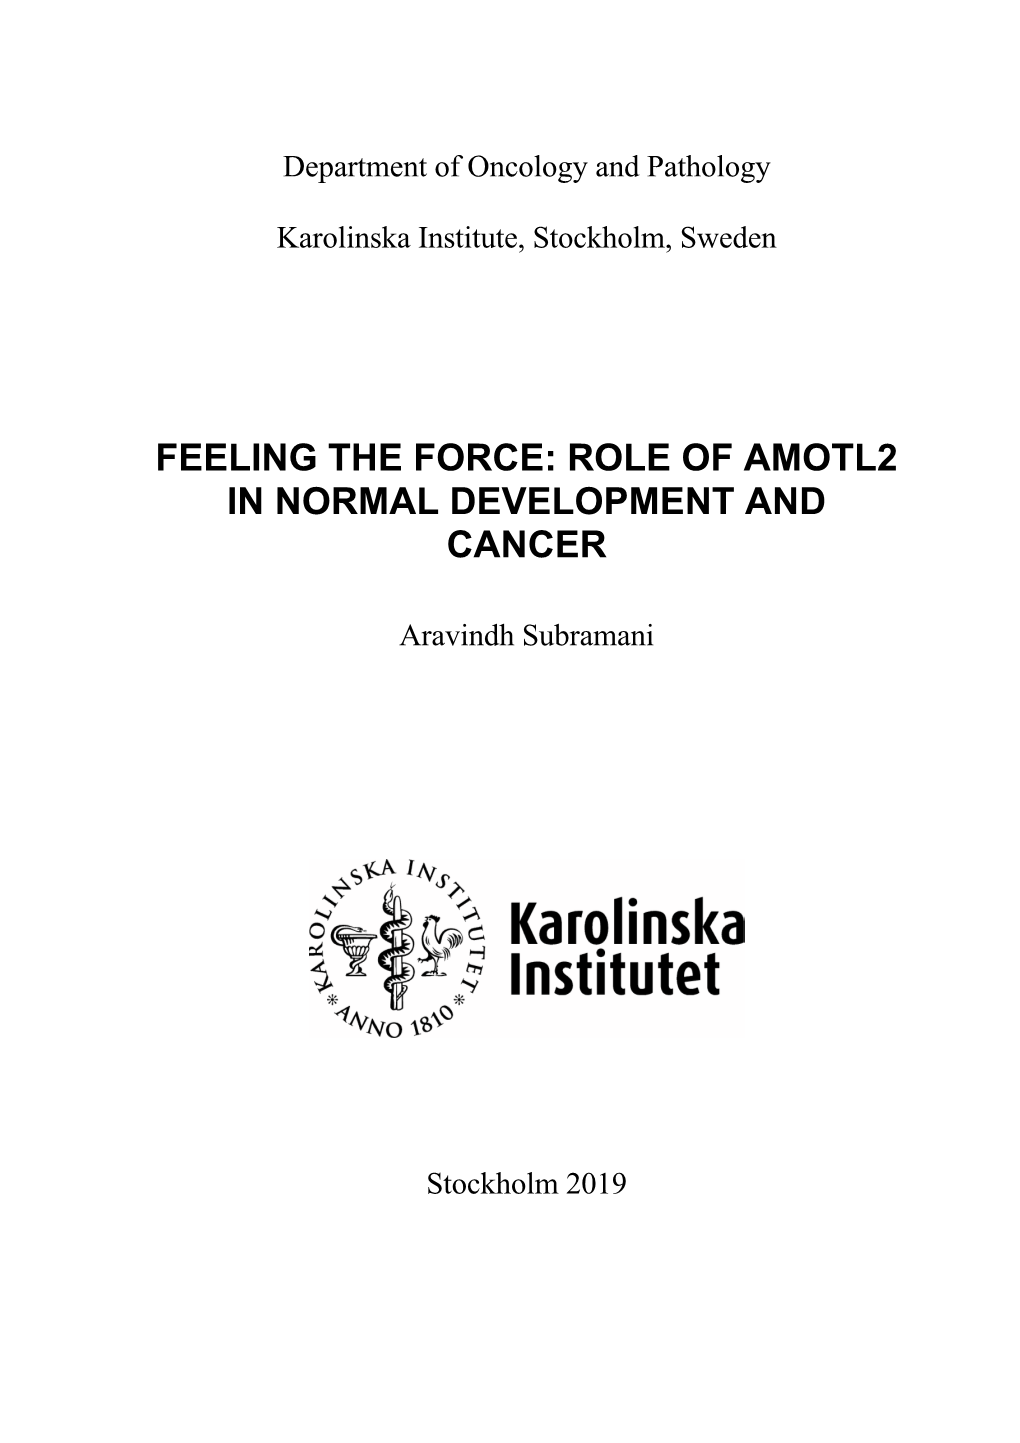 Feeling the Force: Role of Amotl2 in Normal Development and Cancer